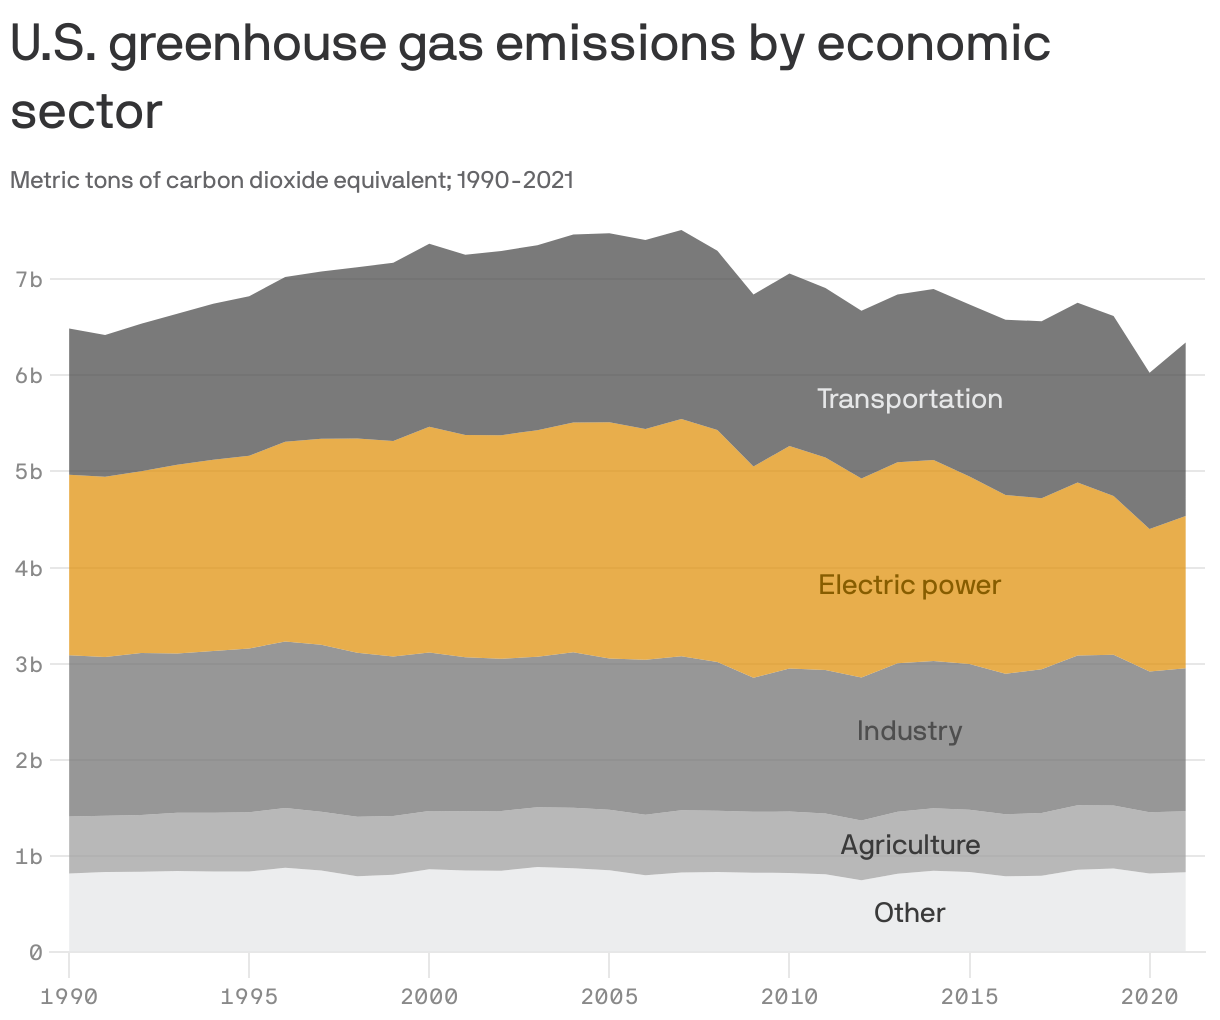 U.S. greenhouse gas emissions by economic sector